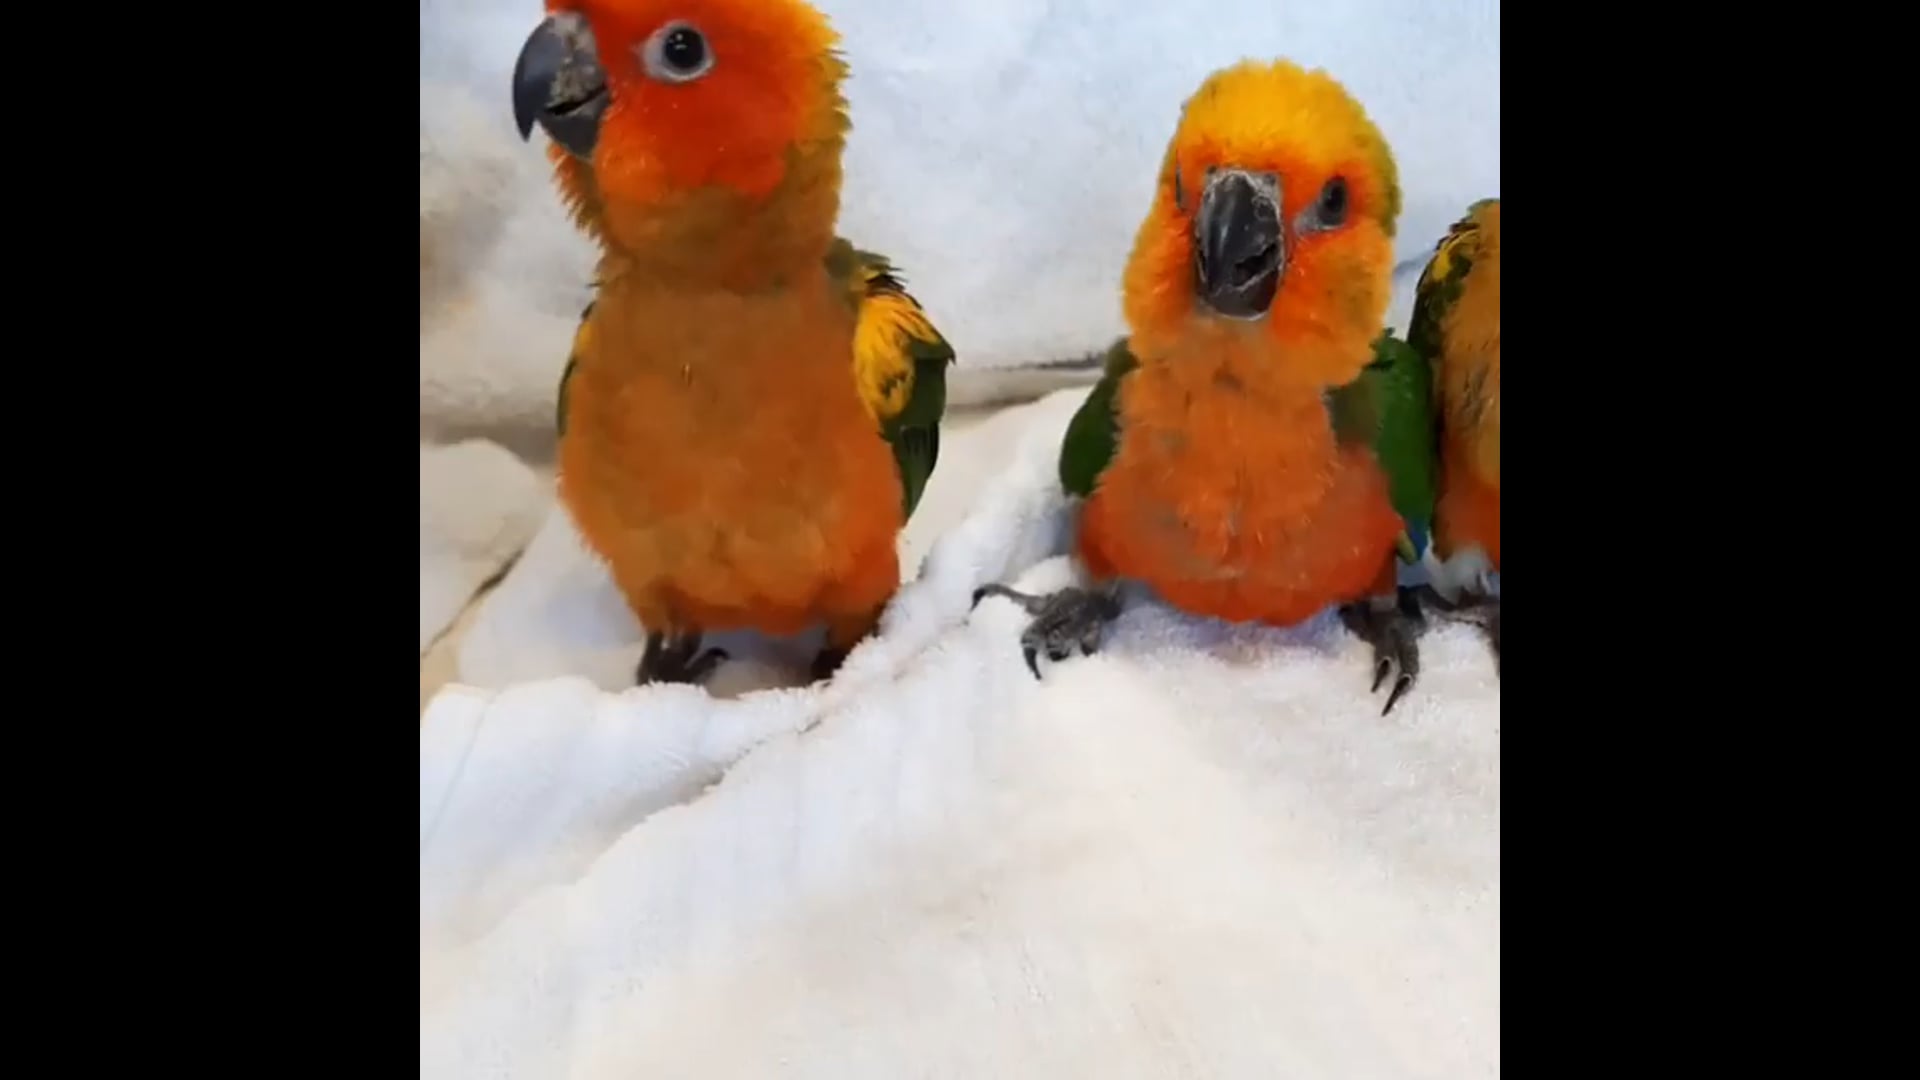 Funny Parrots: Cute and Funny Parrot Videos Compilation